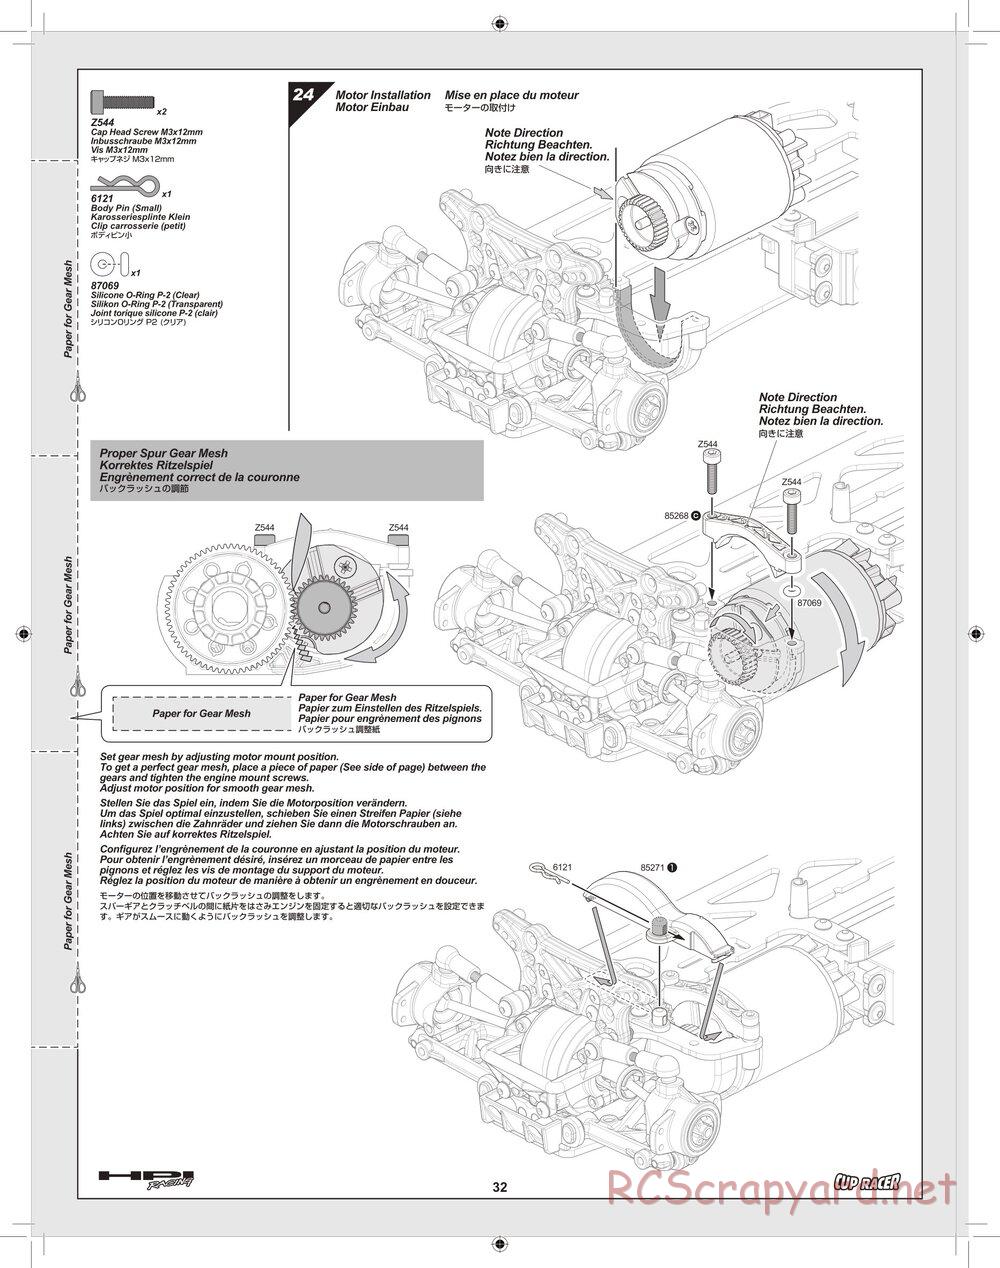 HPI - Cup Racer - Manual - Page 32